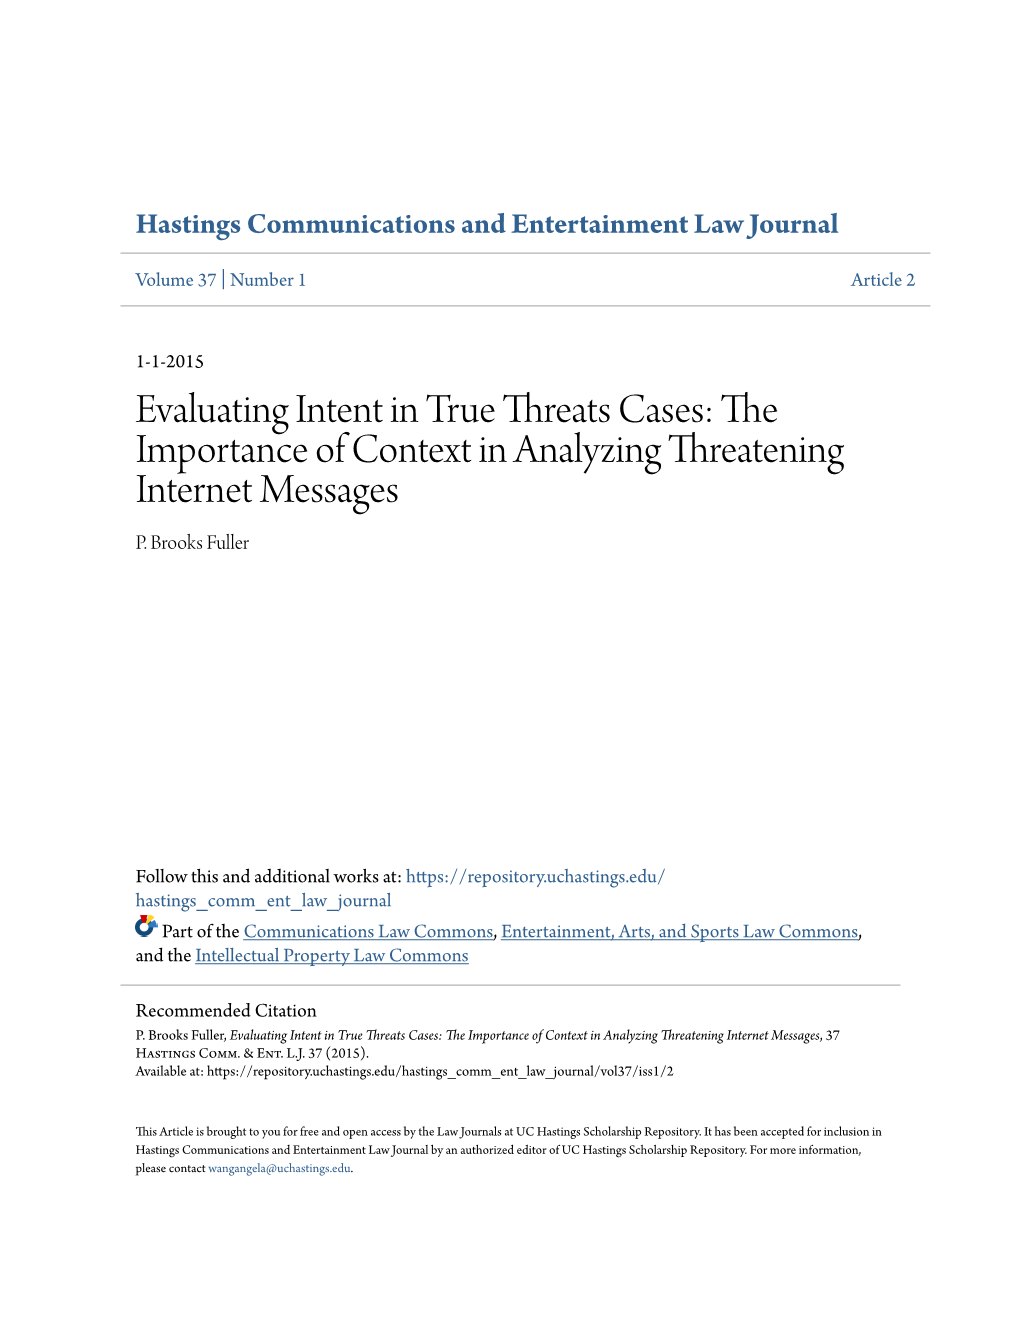 Evaluating Intent in True Threats Cases: the Importance of Context in Analyzing Threatening Internet Messages P